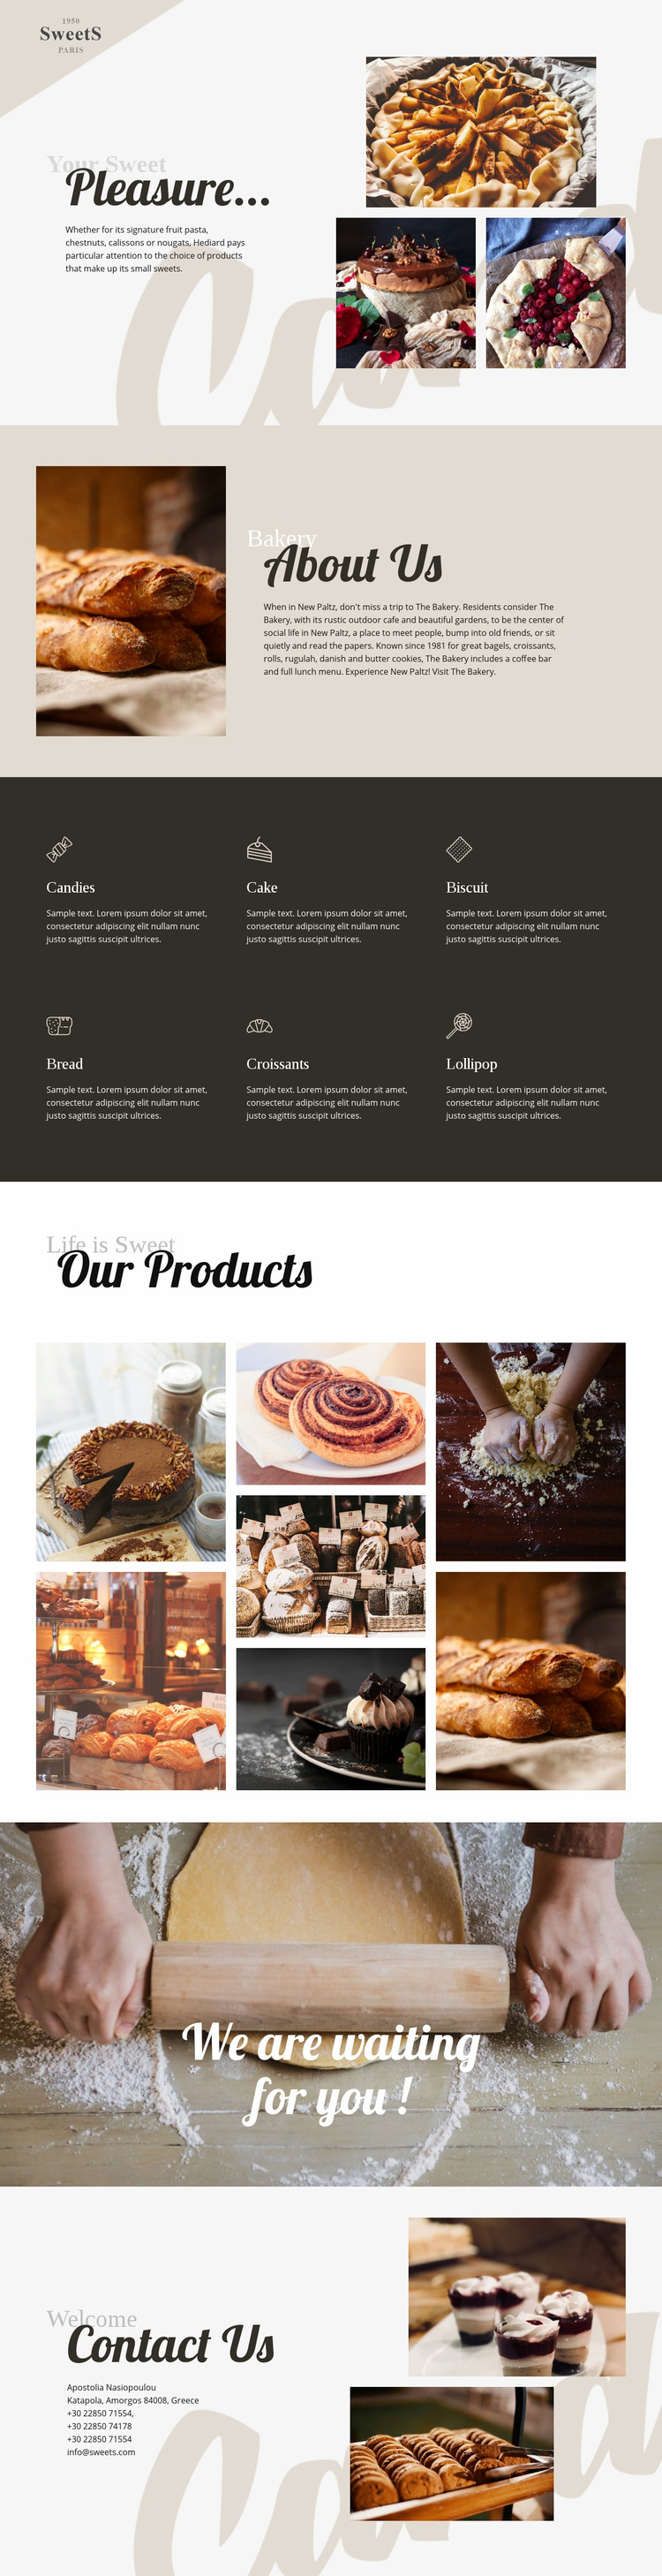 Cakes and baking food Web Page Designer